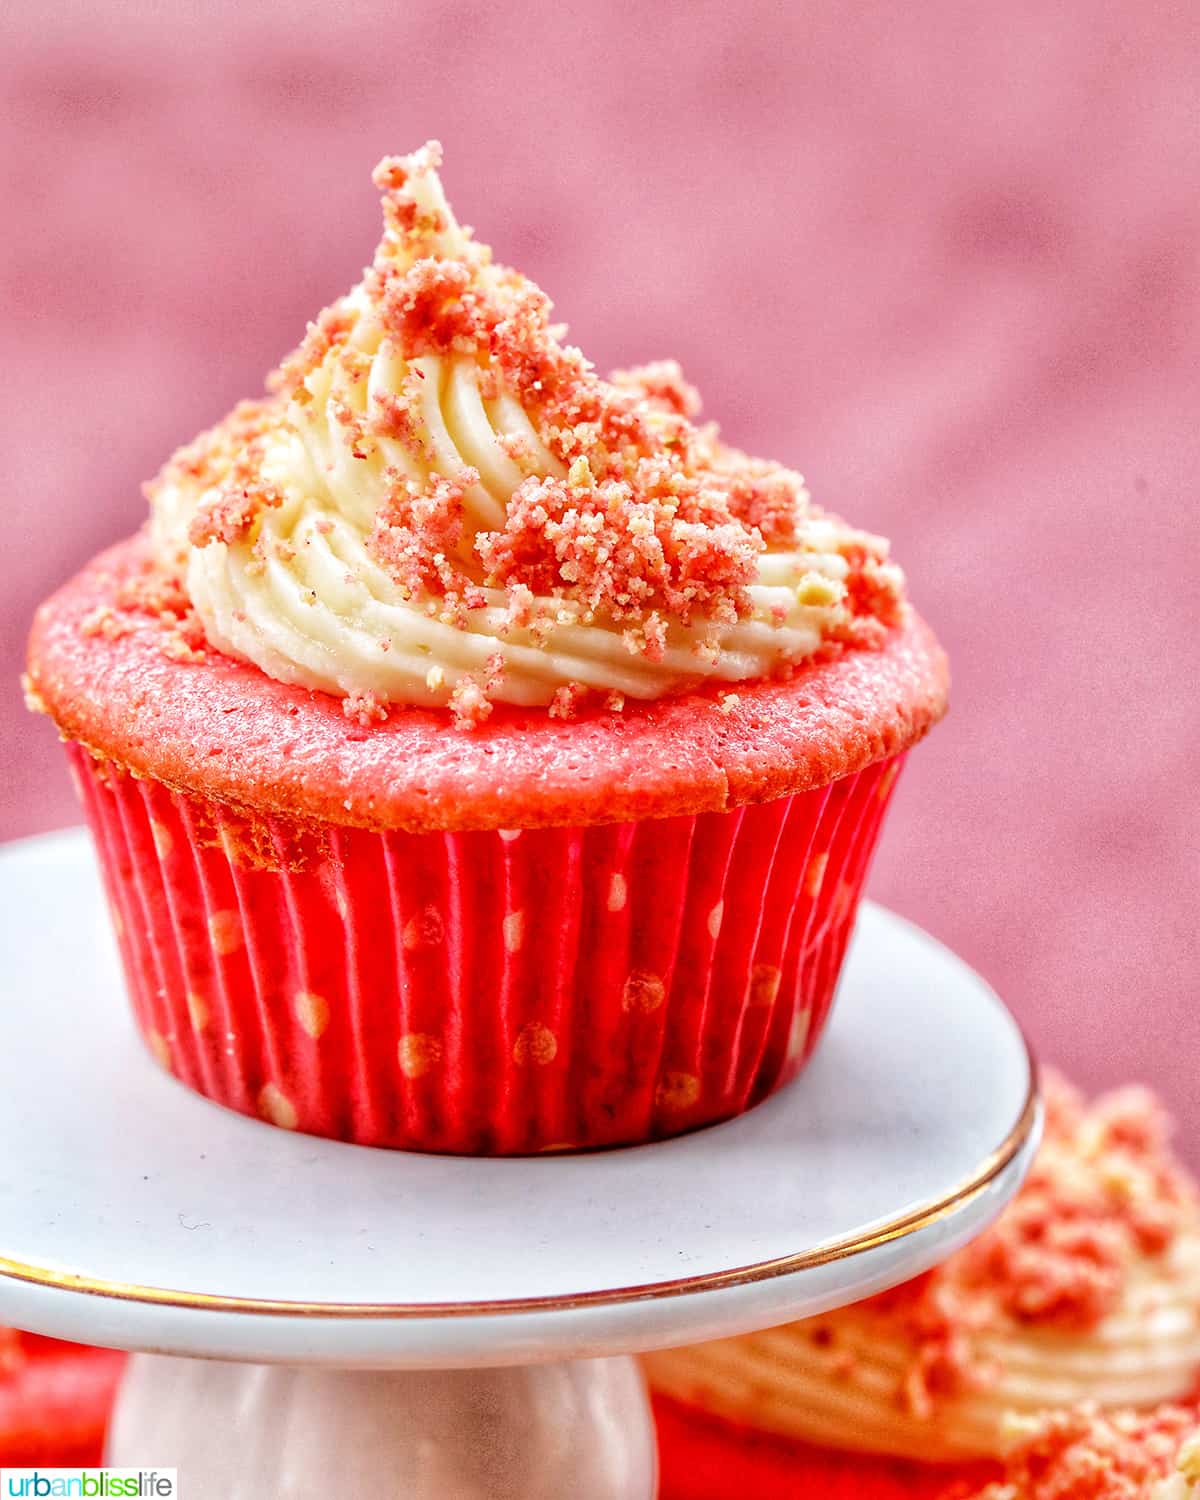 A strawberry cupcake with vanilla frosting and strawberry crunch topping on a white cupcake pedestal.